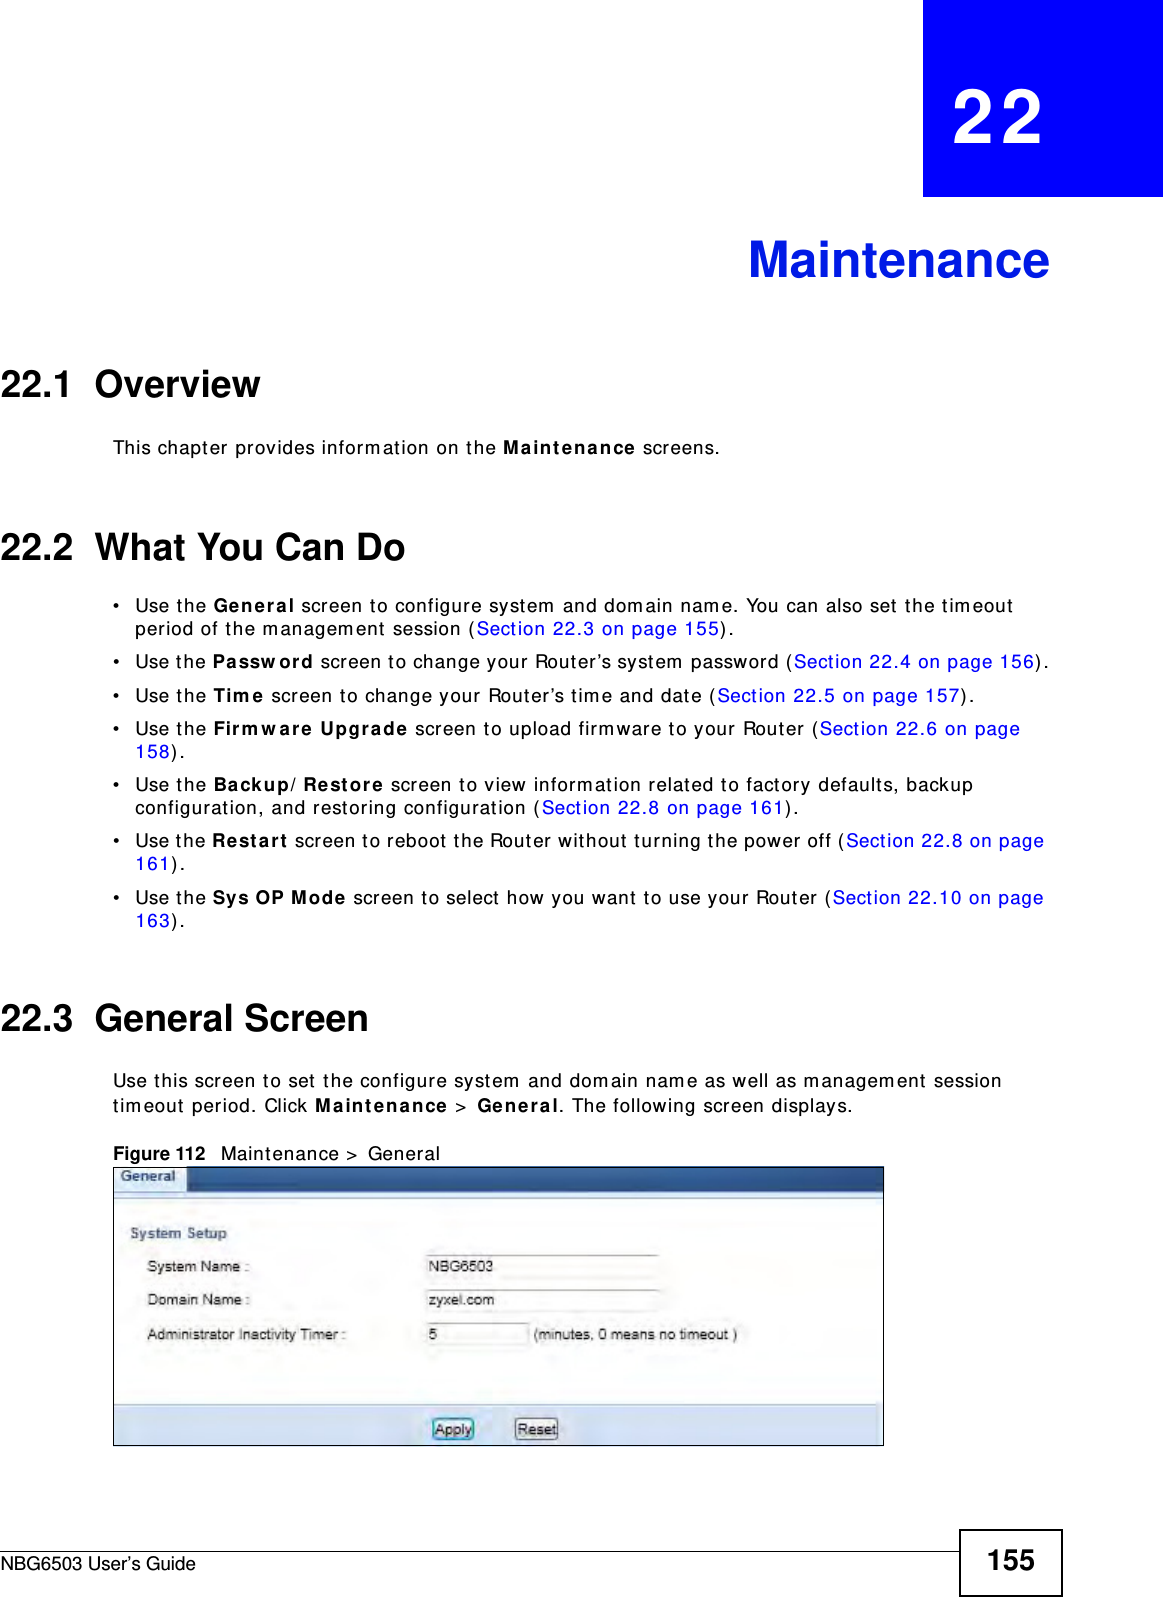 NBG6503 User’s Guide 155CHAPTER   22Maintenance22.1  OverviewThis chapter provides information on the Maintenance screens. 22.2  What You Can Do•Use the General screen to configure system and domain name. You can also set the timeout period of the management session (Section 22.3 on page 155). •Use the Password screen to change your Router’s system password (Section 22.4 on page 156).•Use the Time screen to change your Router’s time and date (Section 22.5 on page 157).•Use the Firmware Upgrade screen to upload firmware to your Router (Section 22.6 on page 158).•Use the Backup/Restore screen to view information related to factory defaults, backup configuration, and restoring configuration (Section 22.8 on page 161).•Use the Restart screen to reboot the Router without turning the power off (Section 22.8 on page 161).•Use the Sys OP Mode screen to select how you want to use your Router (Section 22.10 on page 163). 22.3  General Screen Use this screen to set the configure system and domain name as well as management session timeout period. Click Maintenance &gt; General. The following screen displays.Figure 112   Maintenance &gt; General 